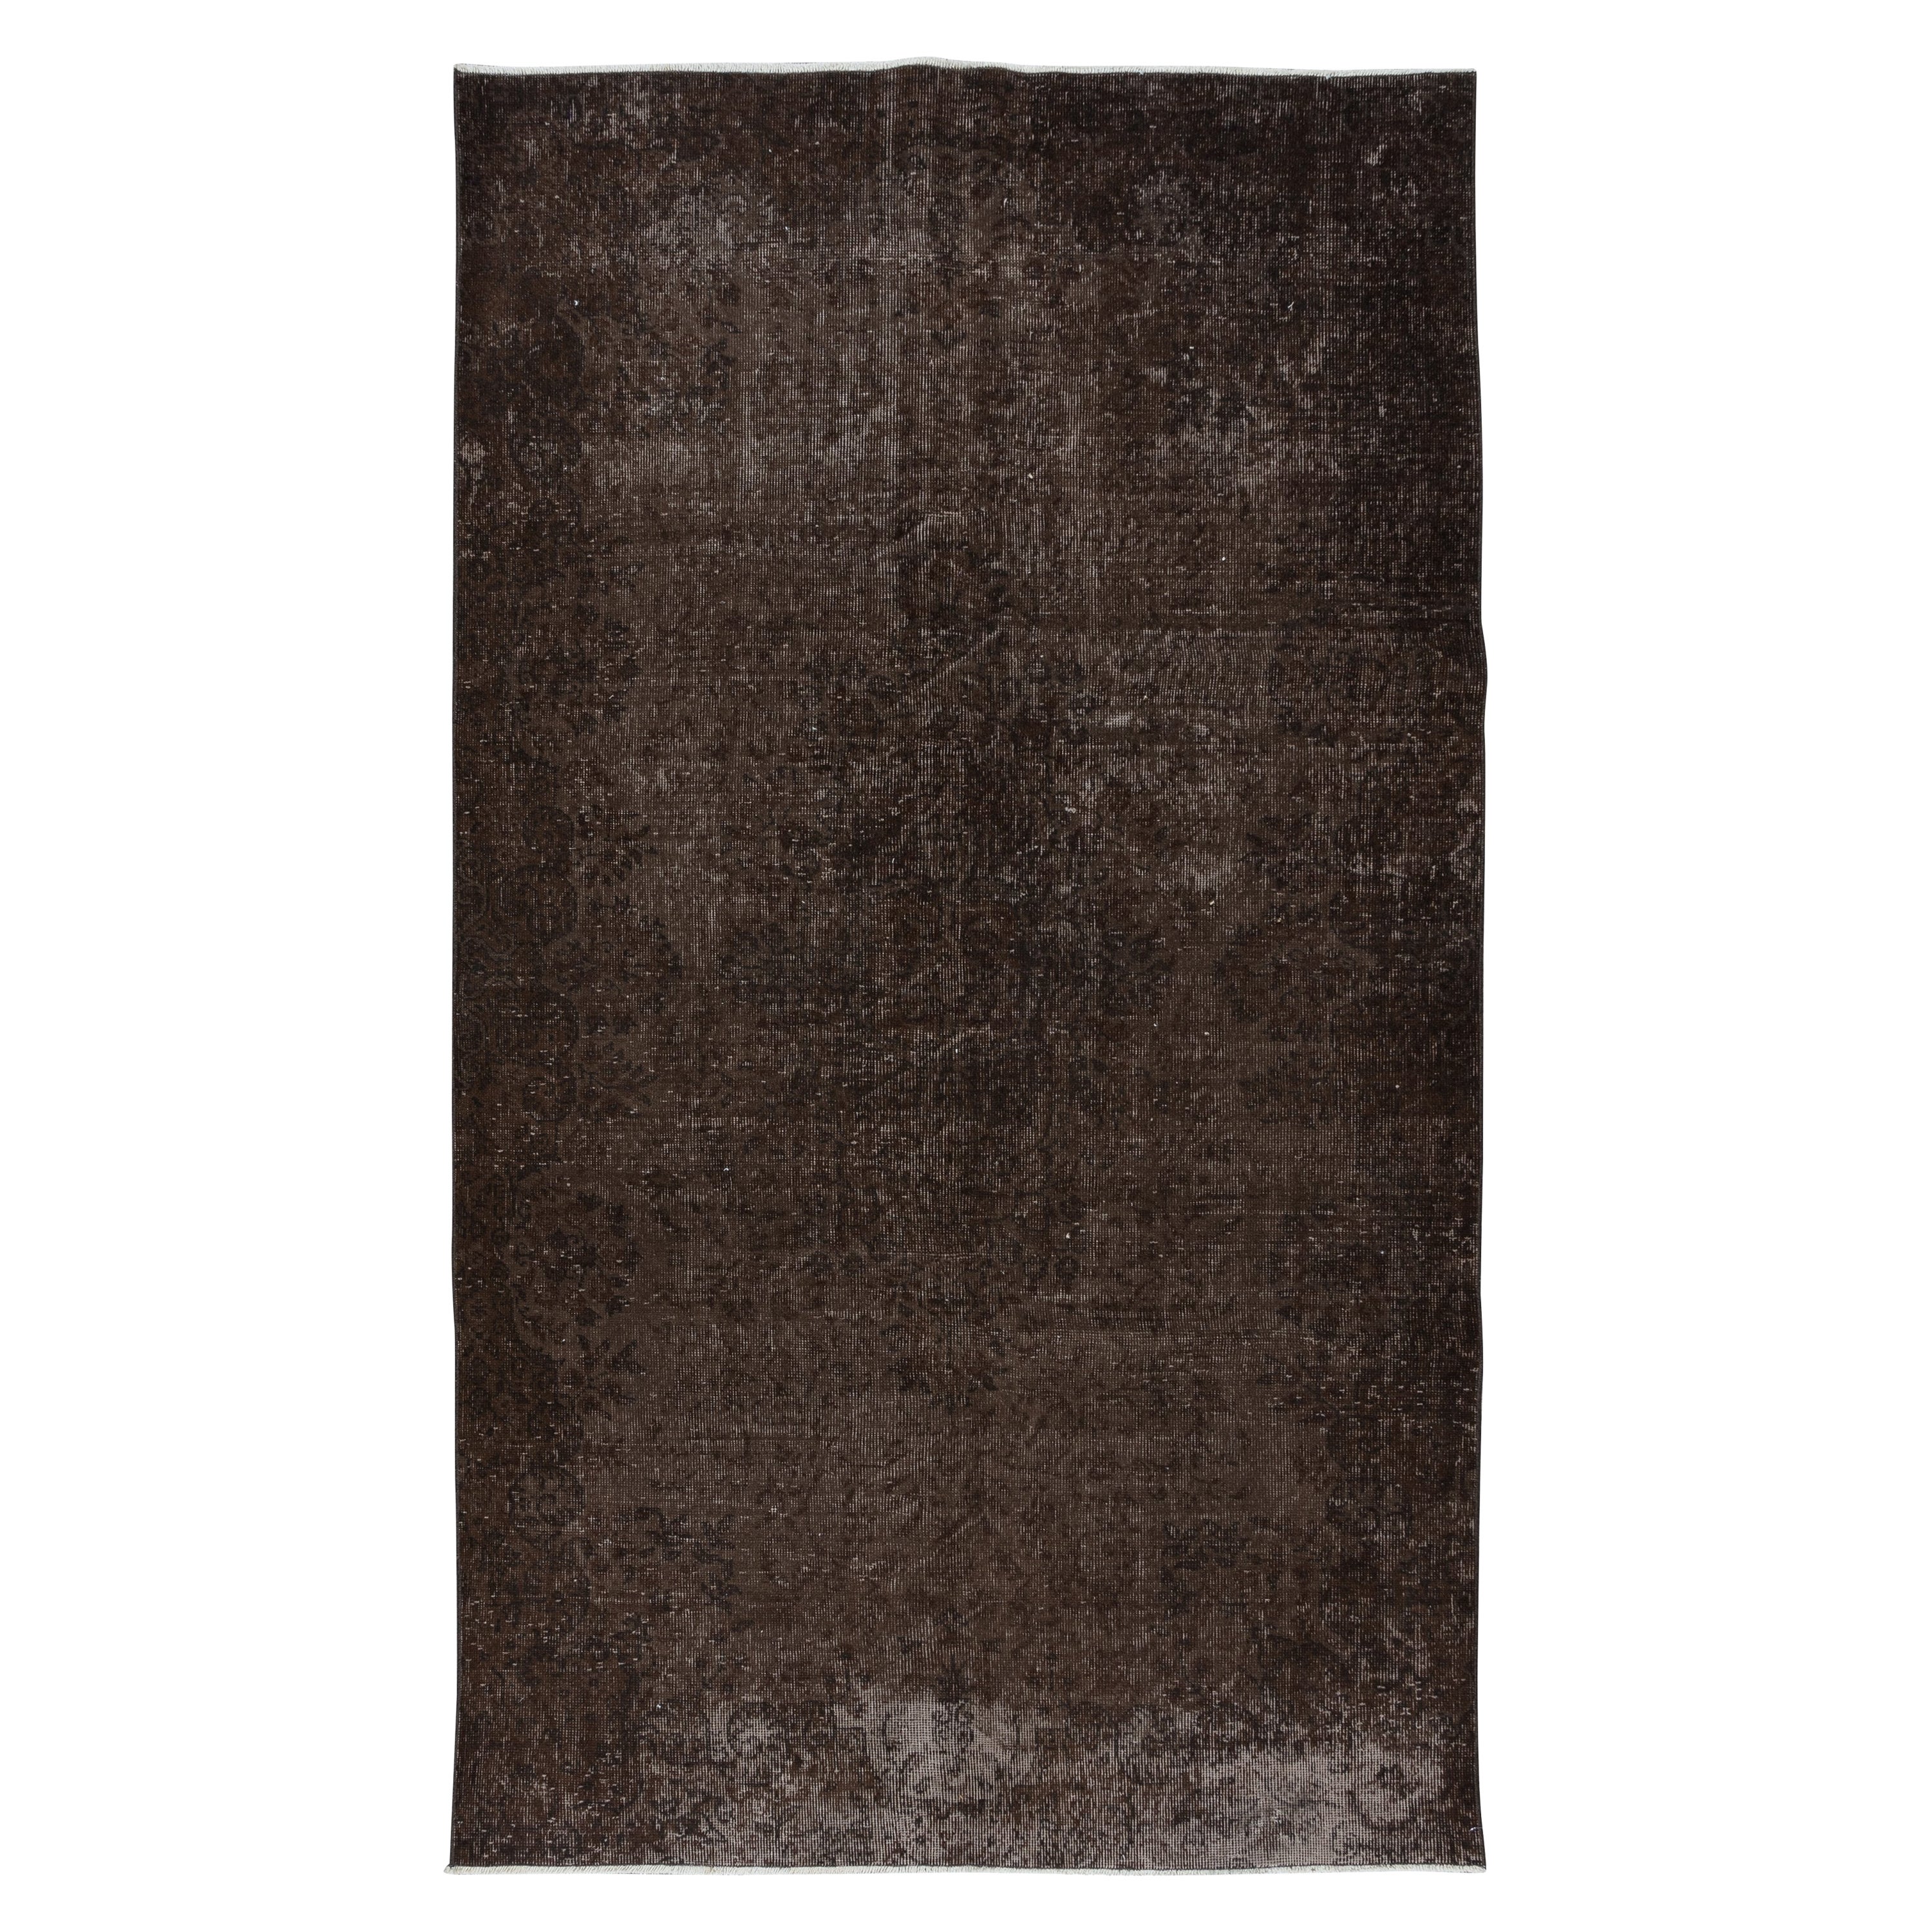 5x9 Ft Upcycled Handmade Turkish Area Rug, Brown ReDyed Carpet for Home & Office